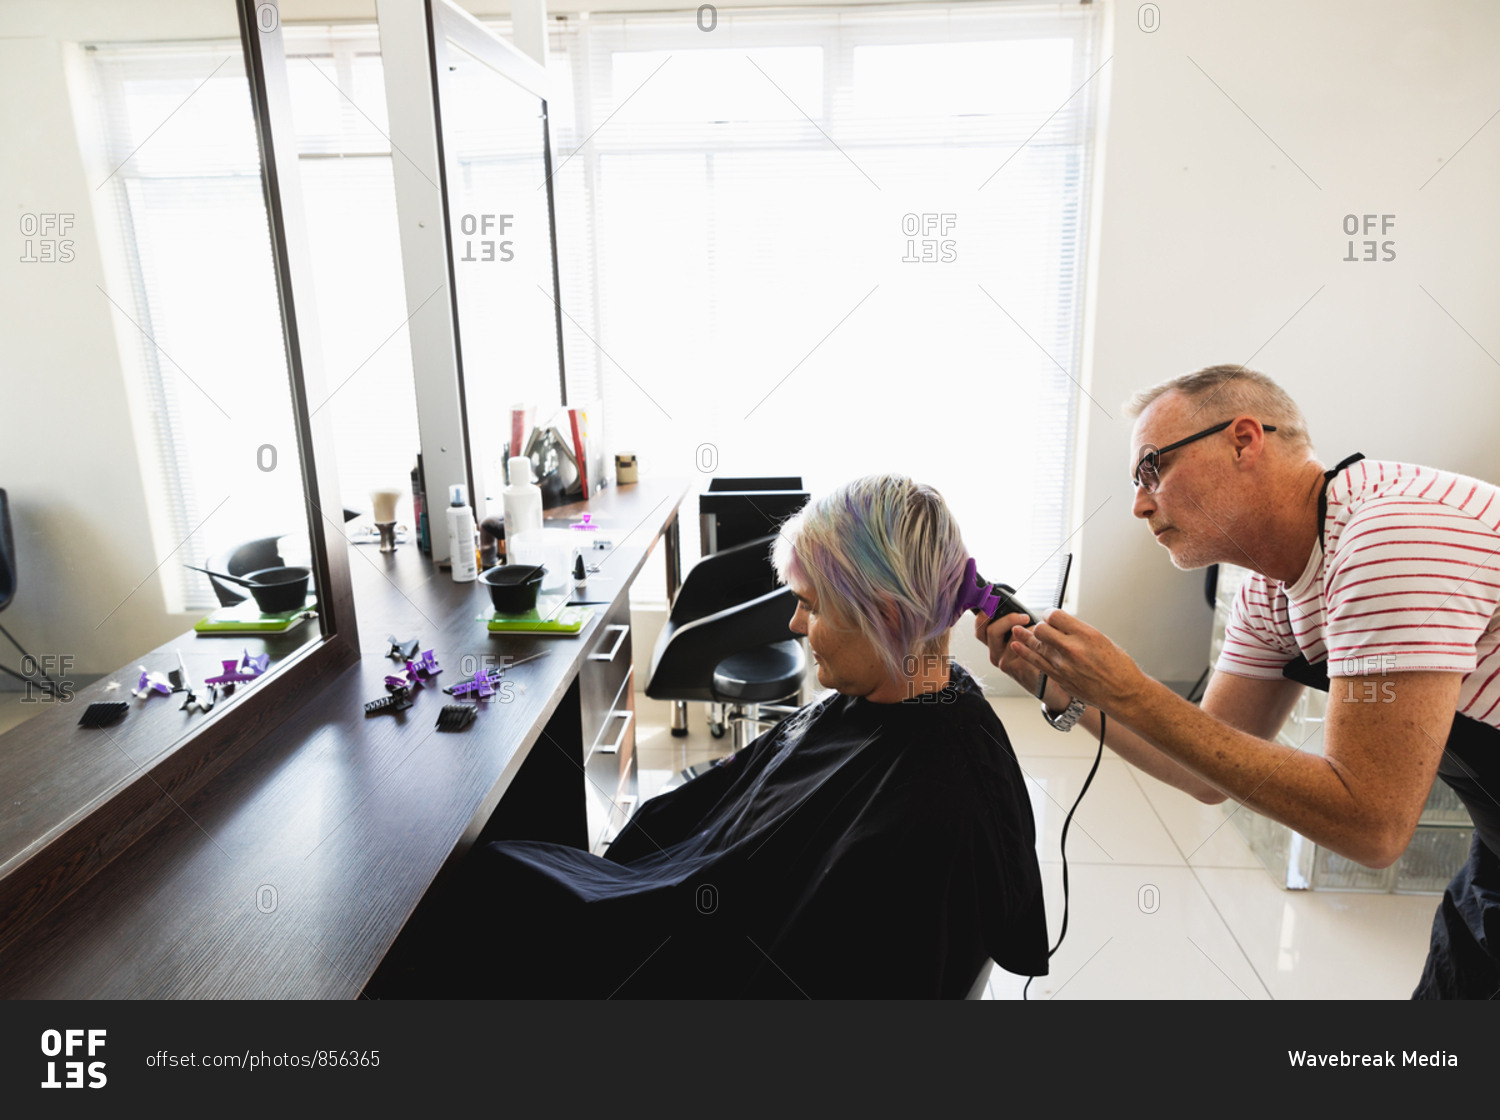 Side view of a middle aged Caucasian male hairdresser and a young Caucasian woman having her hair trimmed in a hair salon